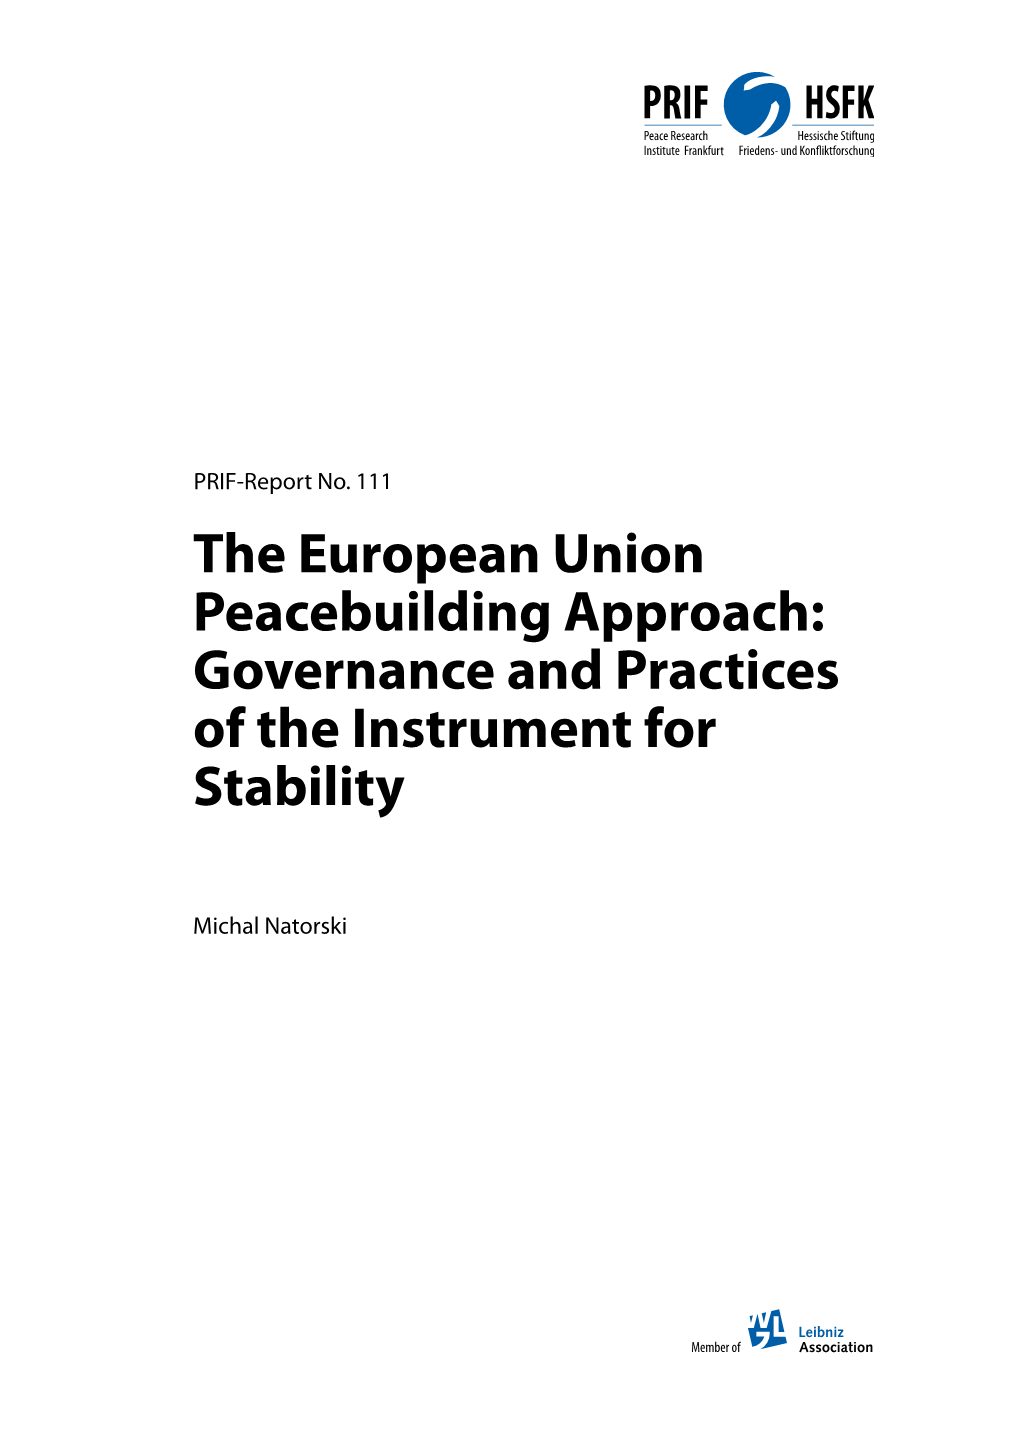 The European Union Peacebuilding Approach: Governance and Practices of the Instrument for Stability